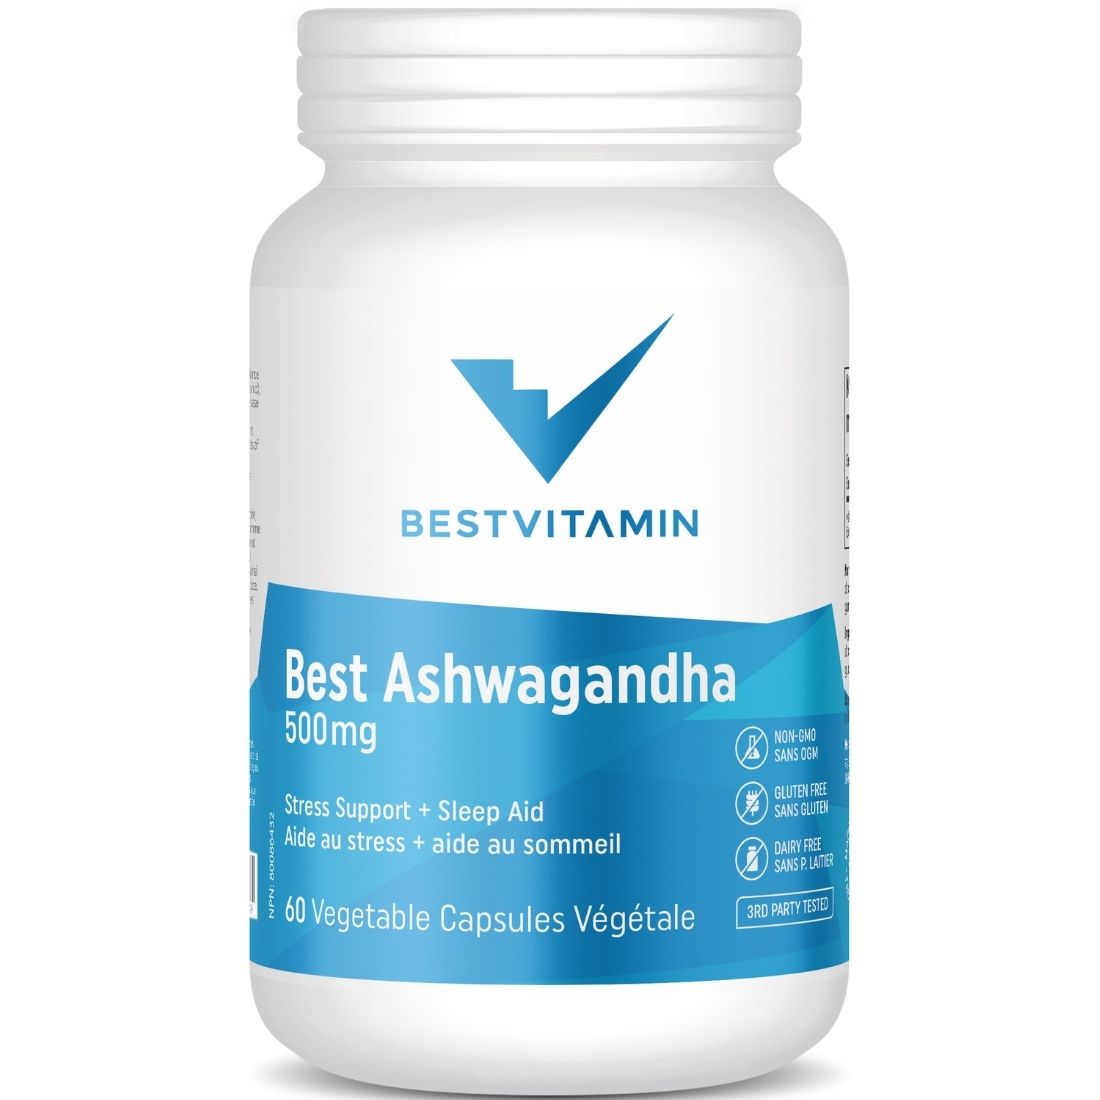 BestVitamin Best Ashwagandha 500mg, Stress Support & Sleep Aid, 60 Vegetable Capsules, Clearance 50% Off, Final Sale